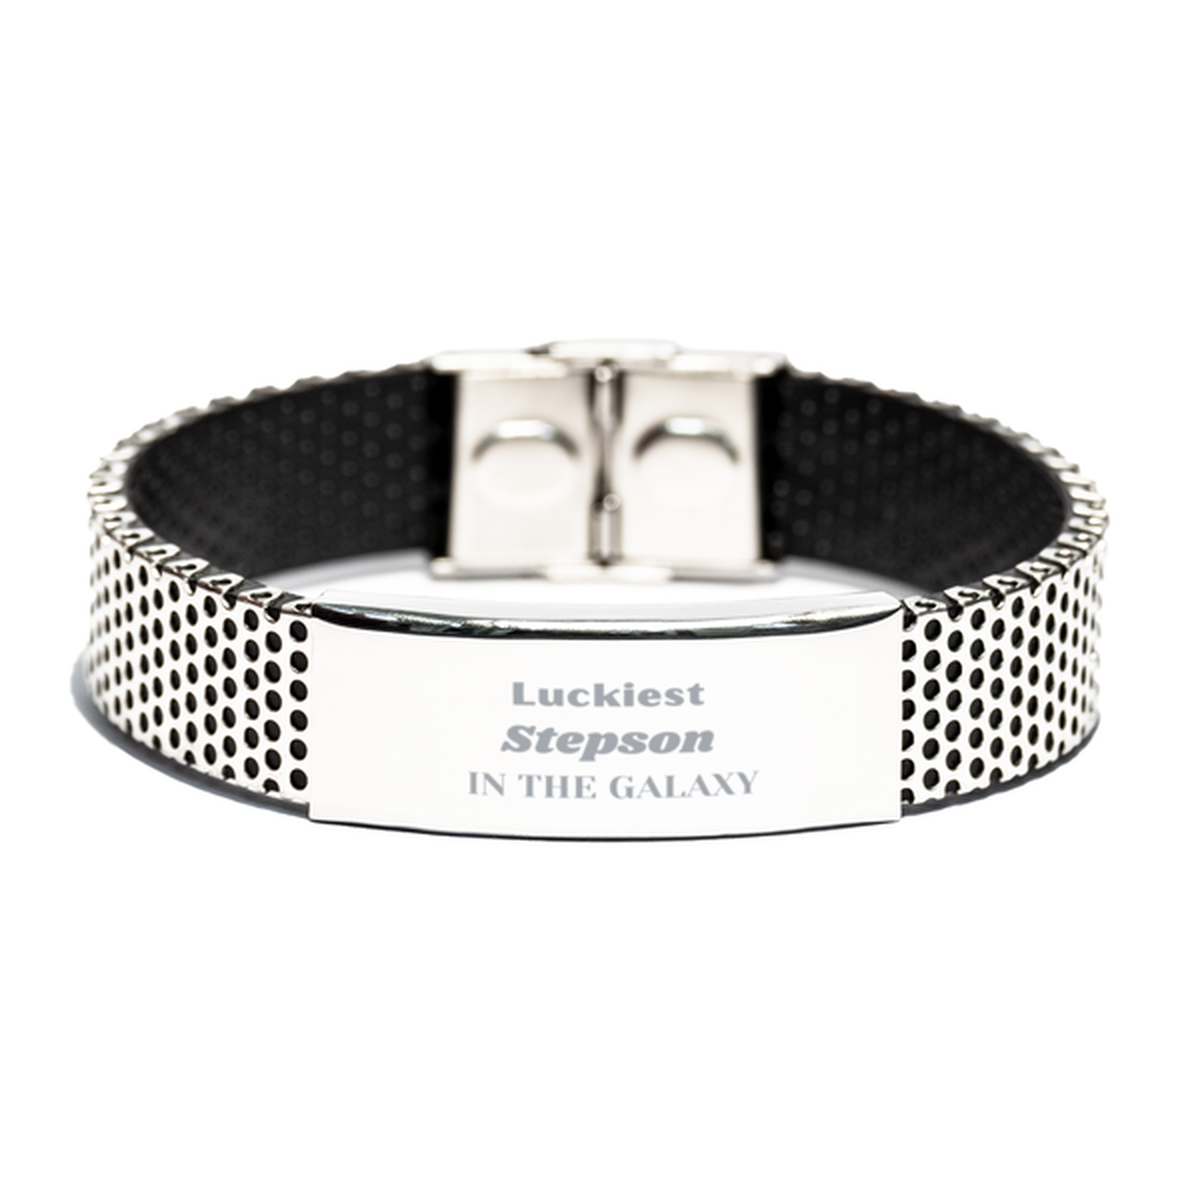 Luckiest Stepson in the Galaxy, To My Stepson Engraved Gifts, Christmas Stepson Stainless Steel Bracelet Gifts, X-mas Birthday Unique Gifts For Stepson Men Women